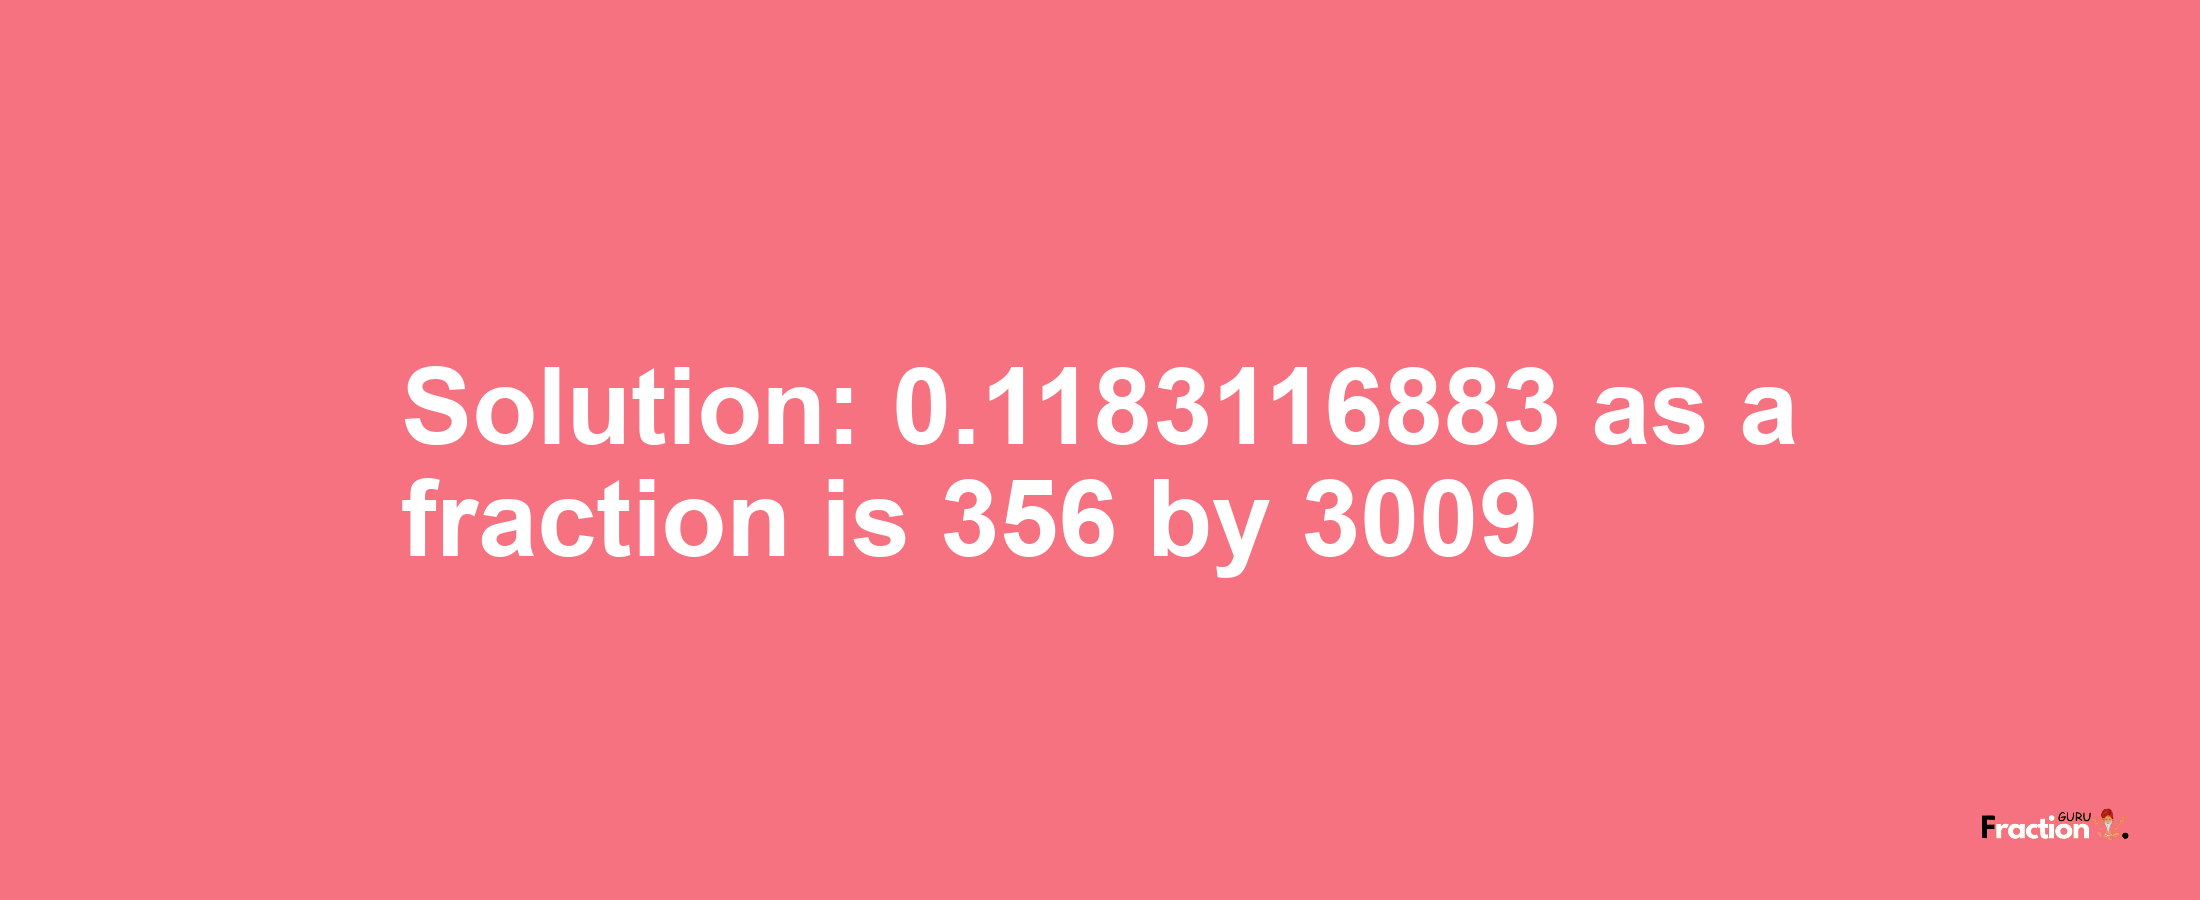 Solution:0.1183116883 as a fraction is 356/3009